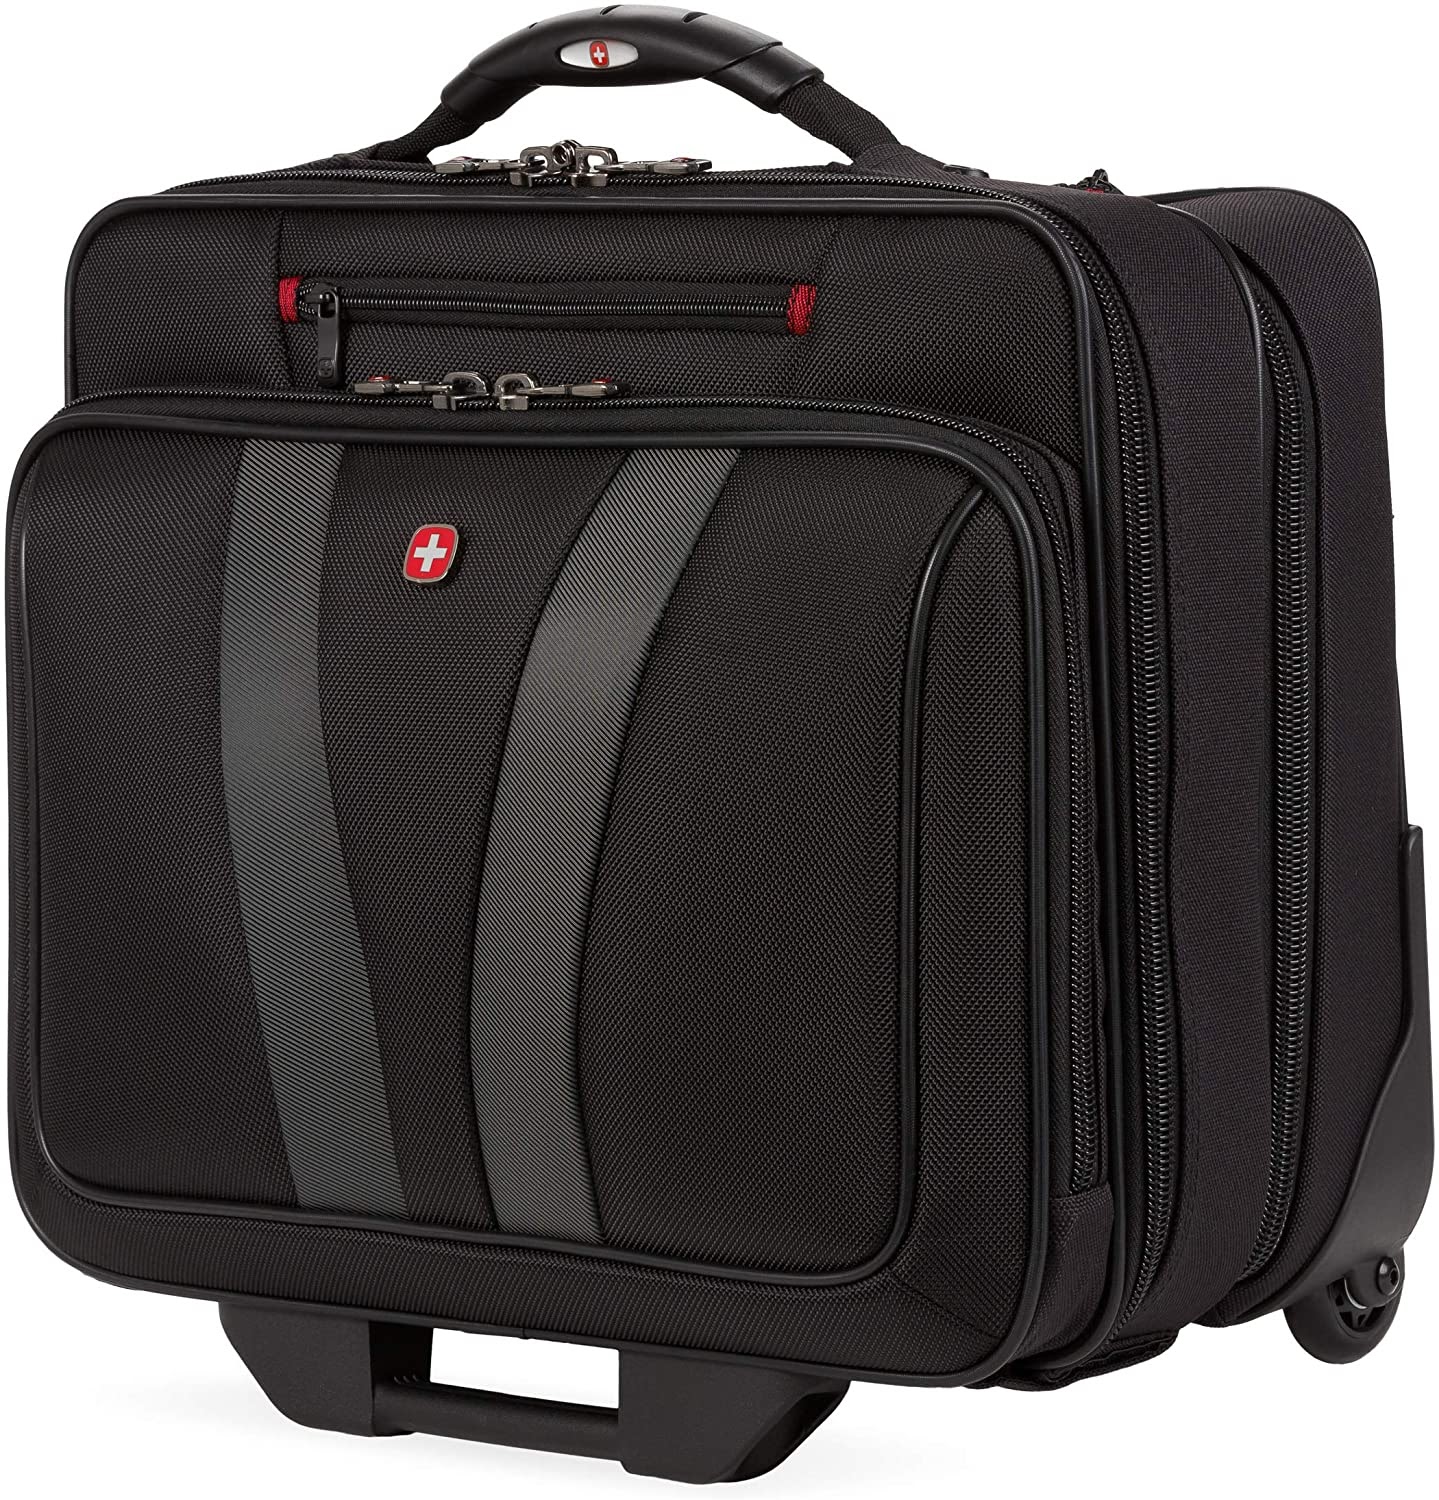 Wenger Granada Pro 15.6-Inch Padded Rolling Laptop Bag, 13.8 x 16.5 x 9.8